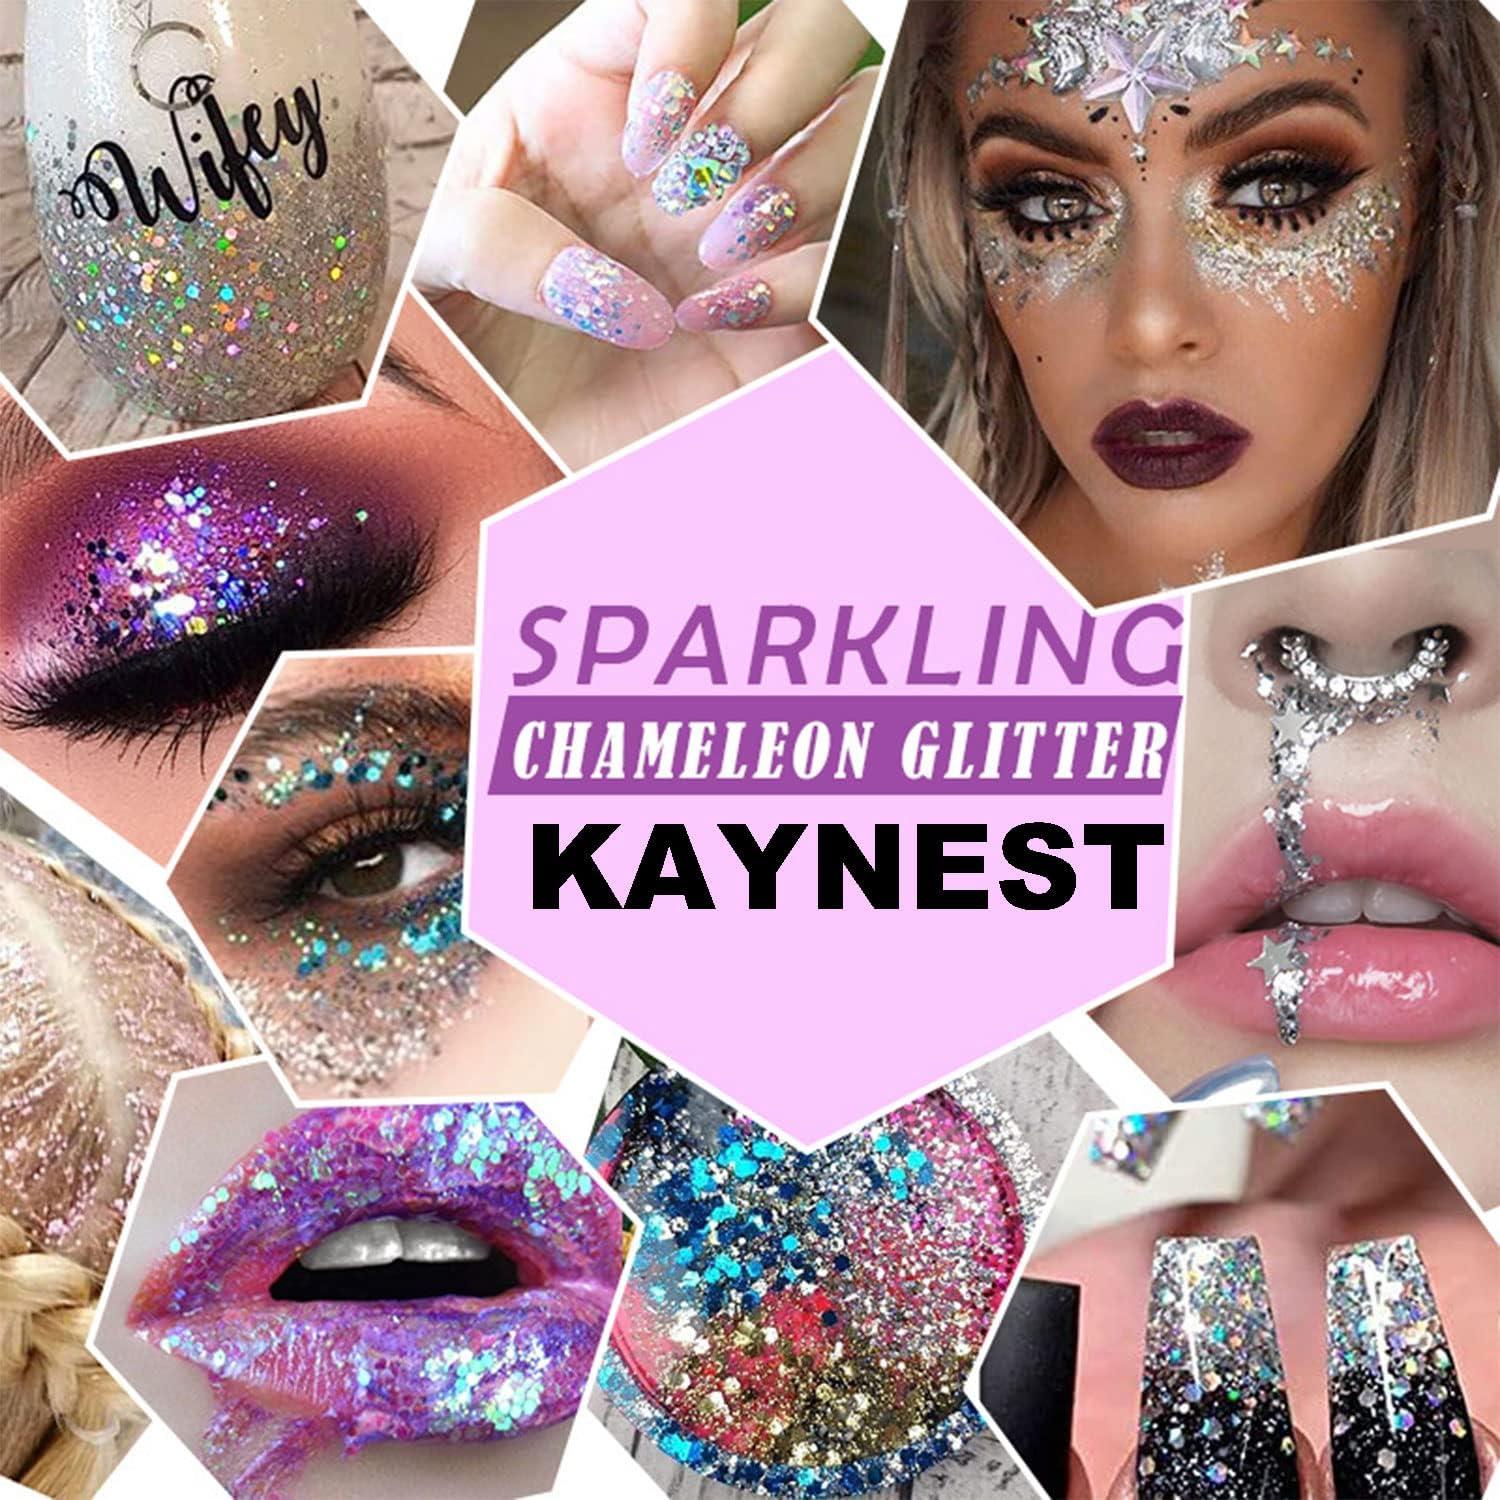 Body Glitter, 2 Jars Holographic Chunky Glitter For Body, Hair, Face, Nail,  Eyeshadow, Long Lasting Mermaid Sequins Glitter With Glitter Glue